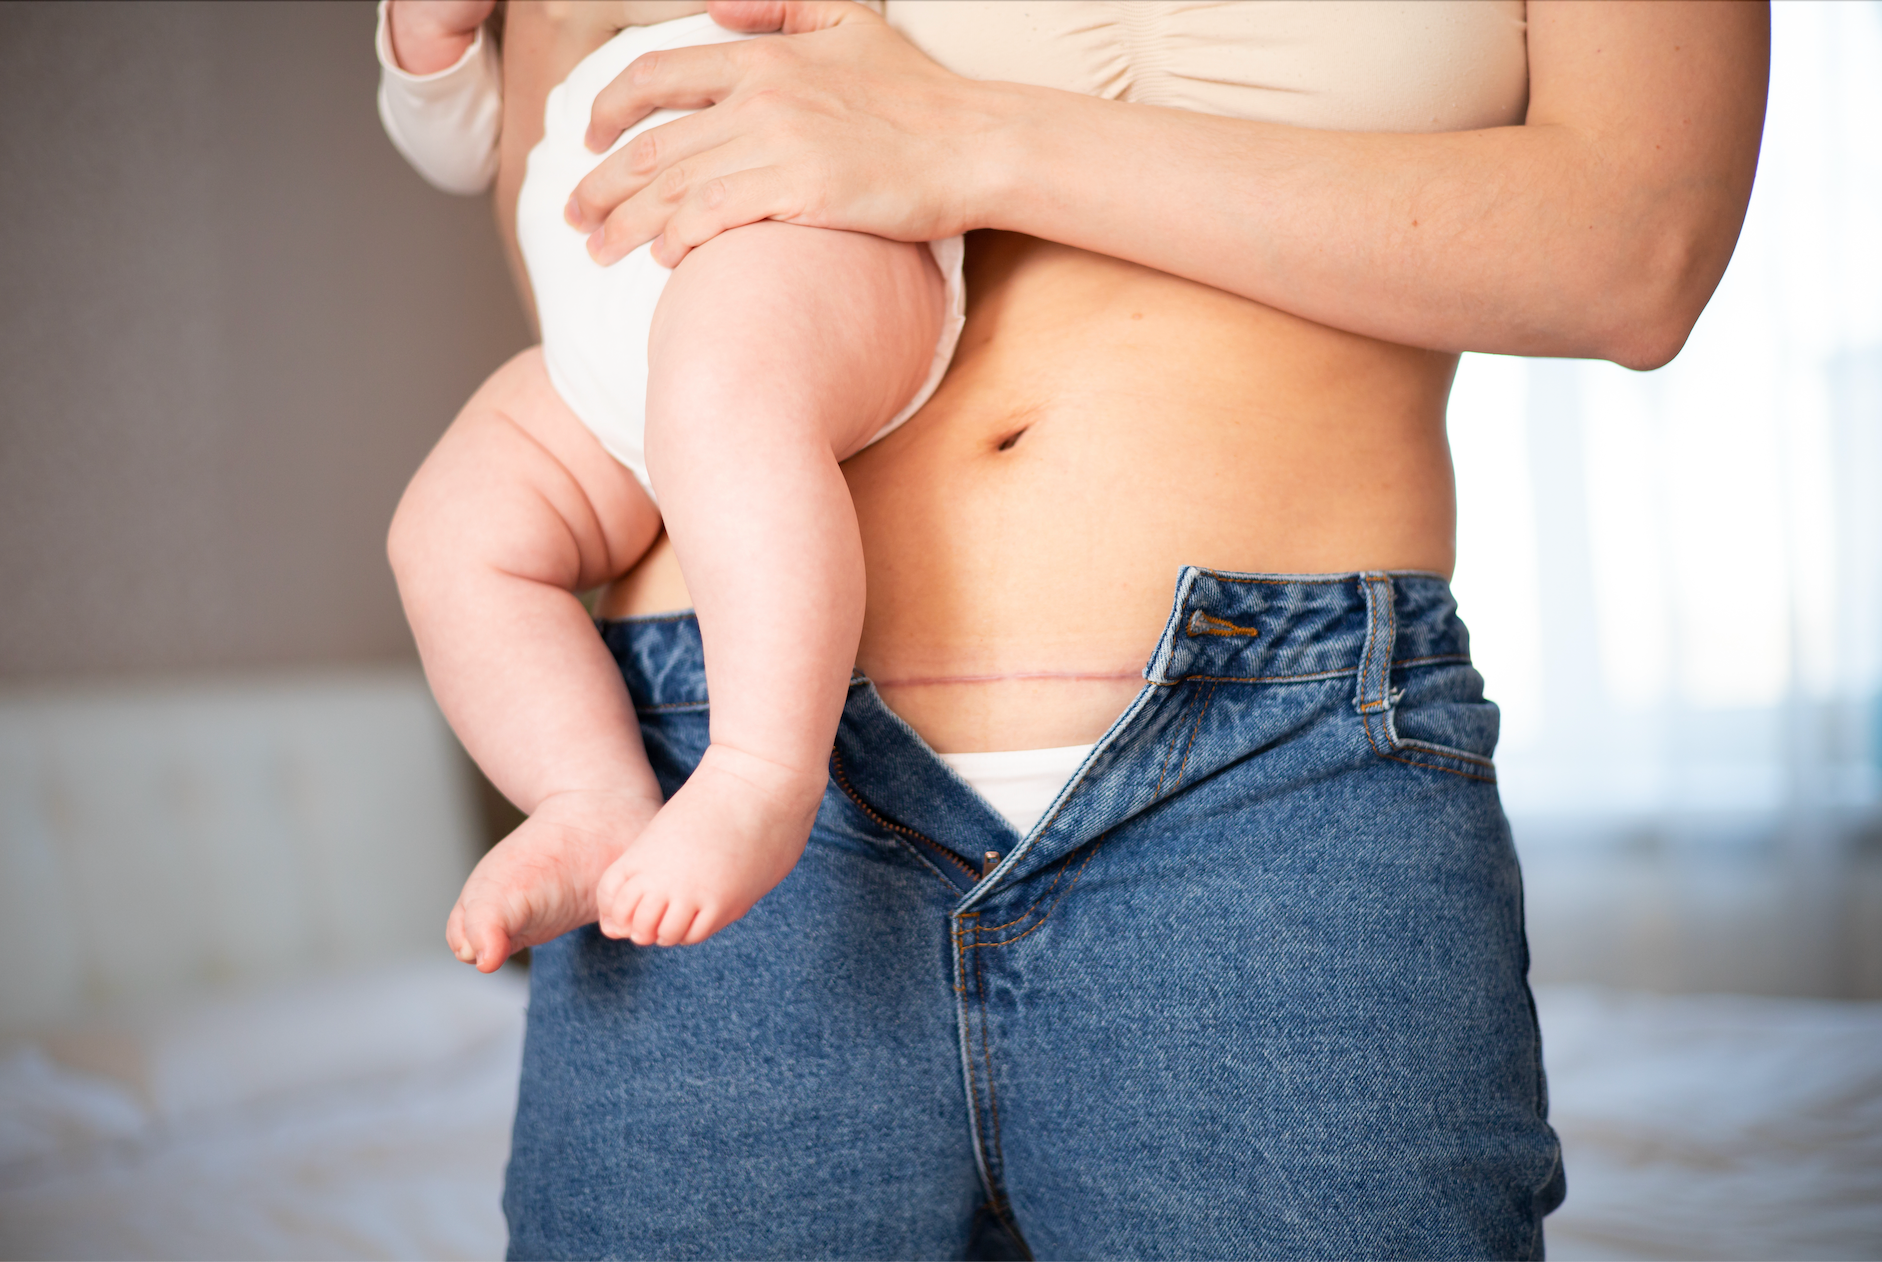 C-section Scars: The ultimate guide to healing and care – My